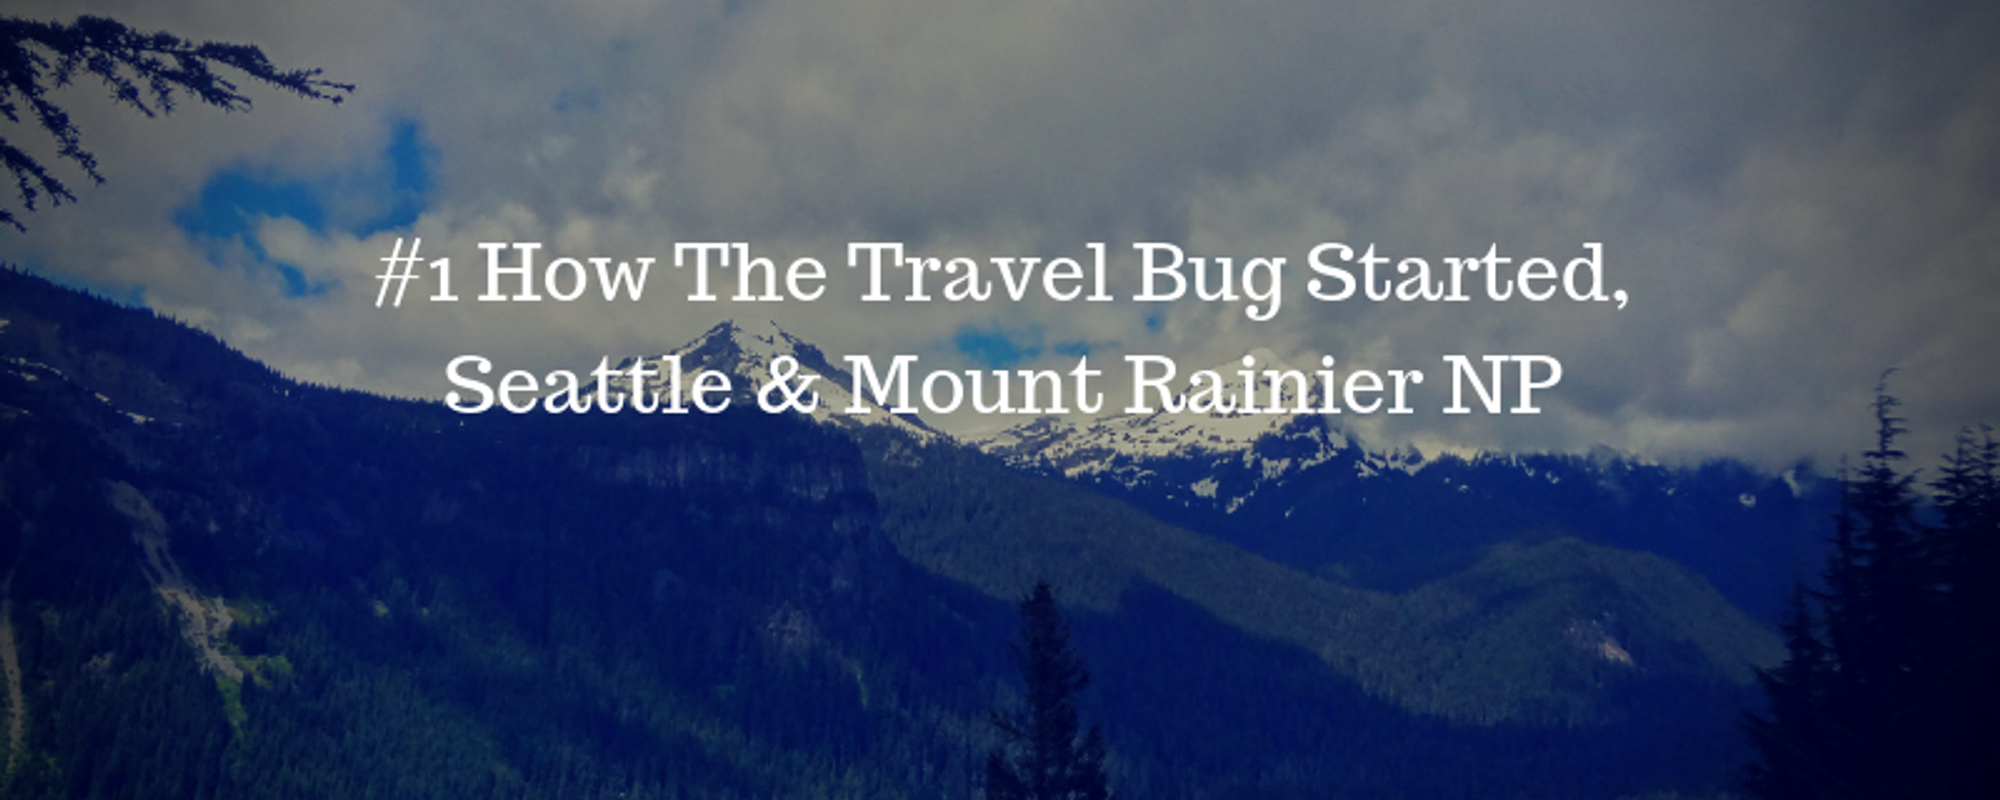 Havey's Travel Diary #1 - How The Travel Bug Started, Seattle & Mount Rainier NP